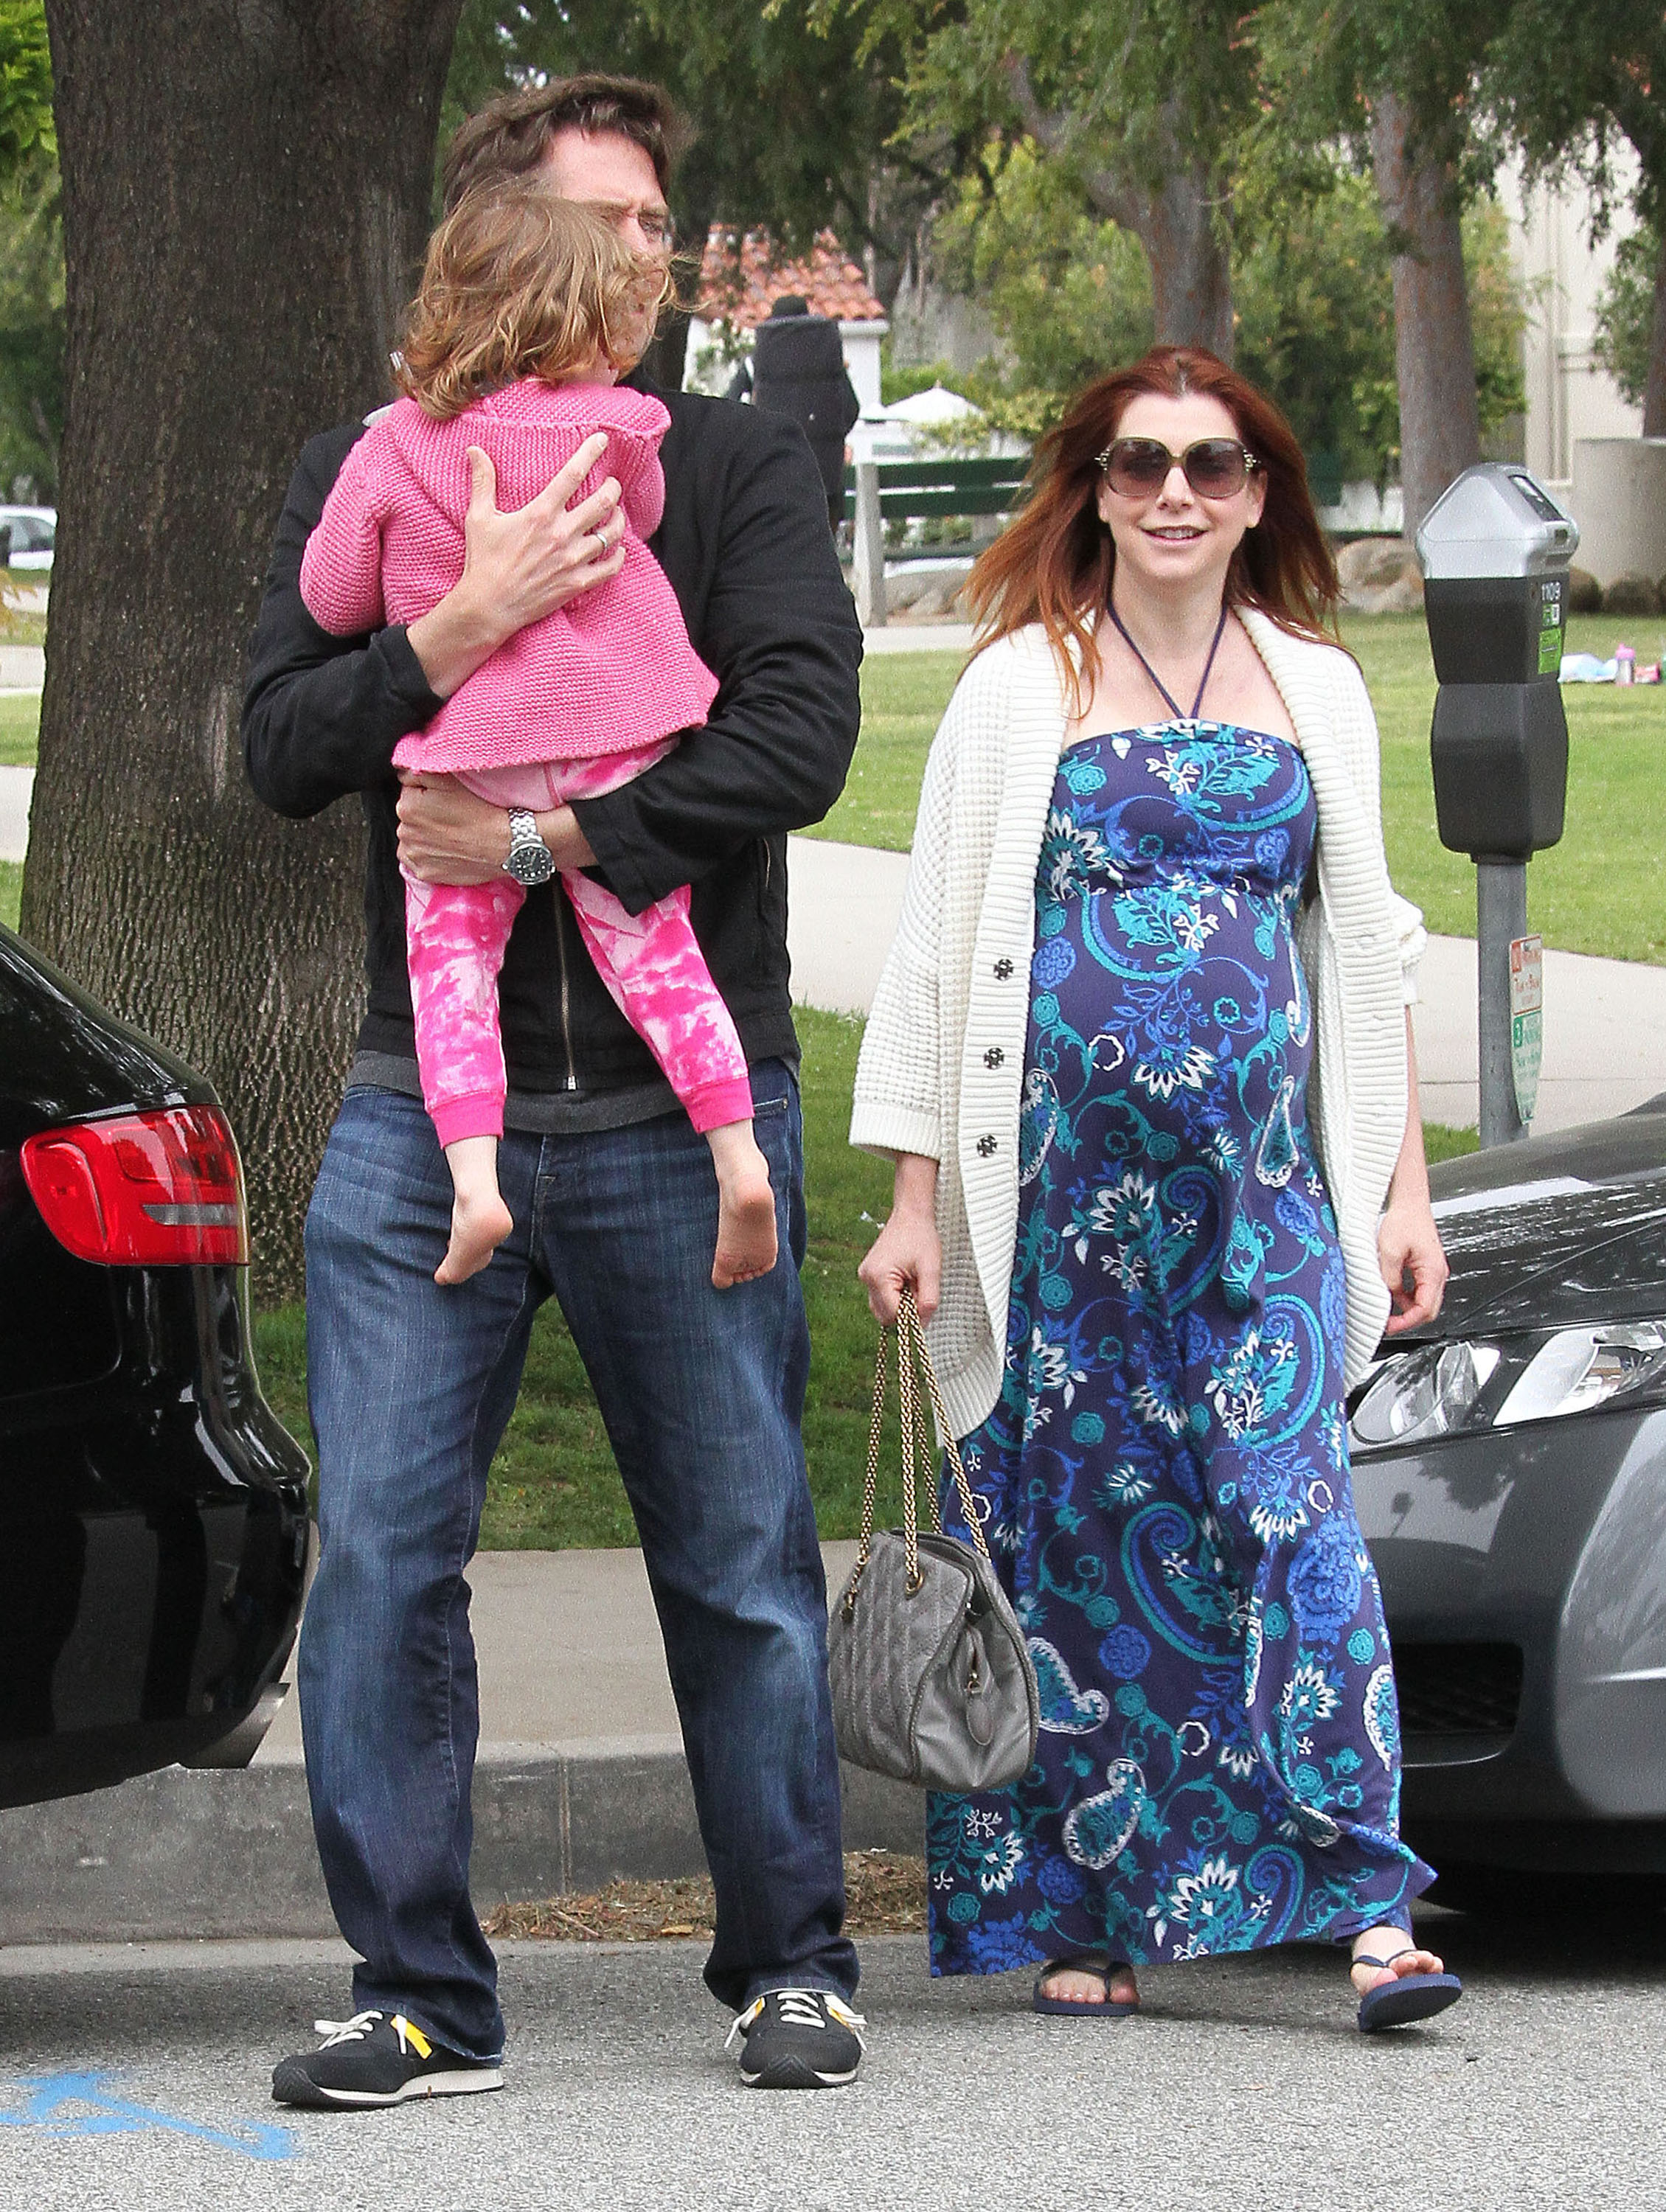 Alyson Hannigan has welcomed a baby girl!